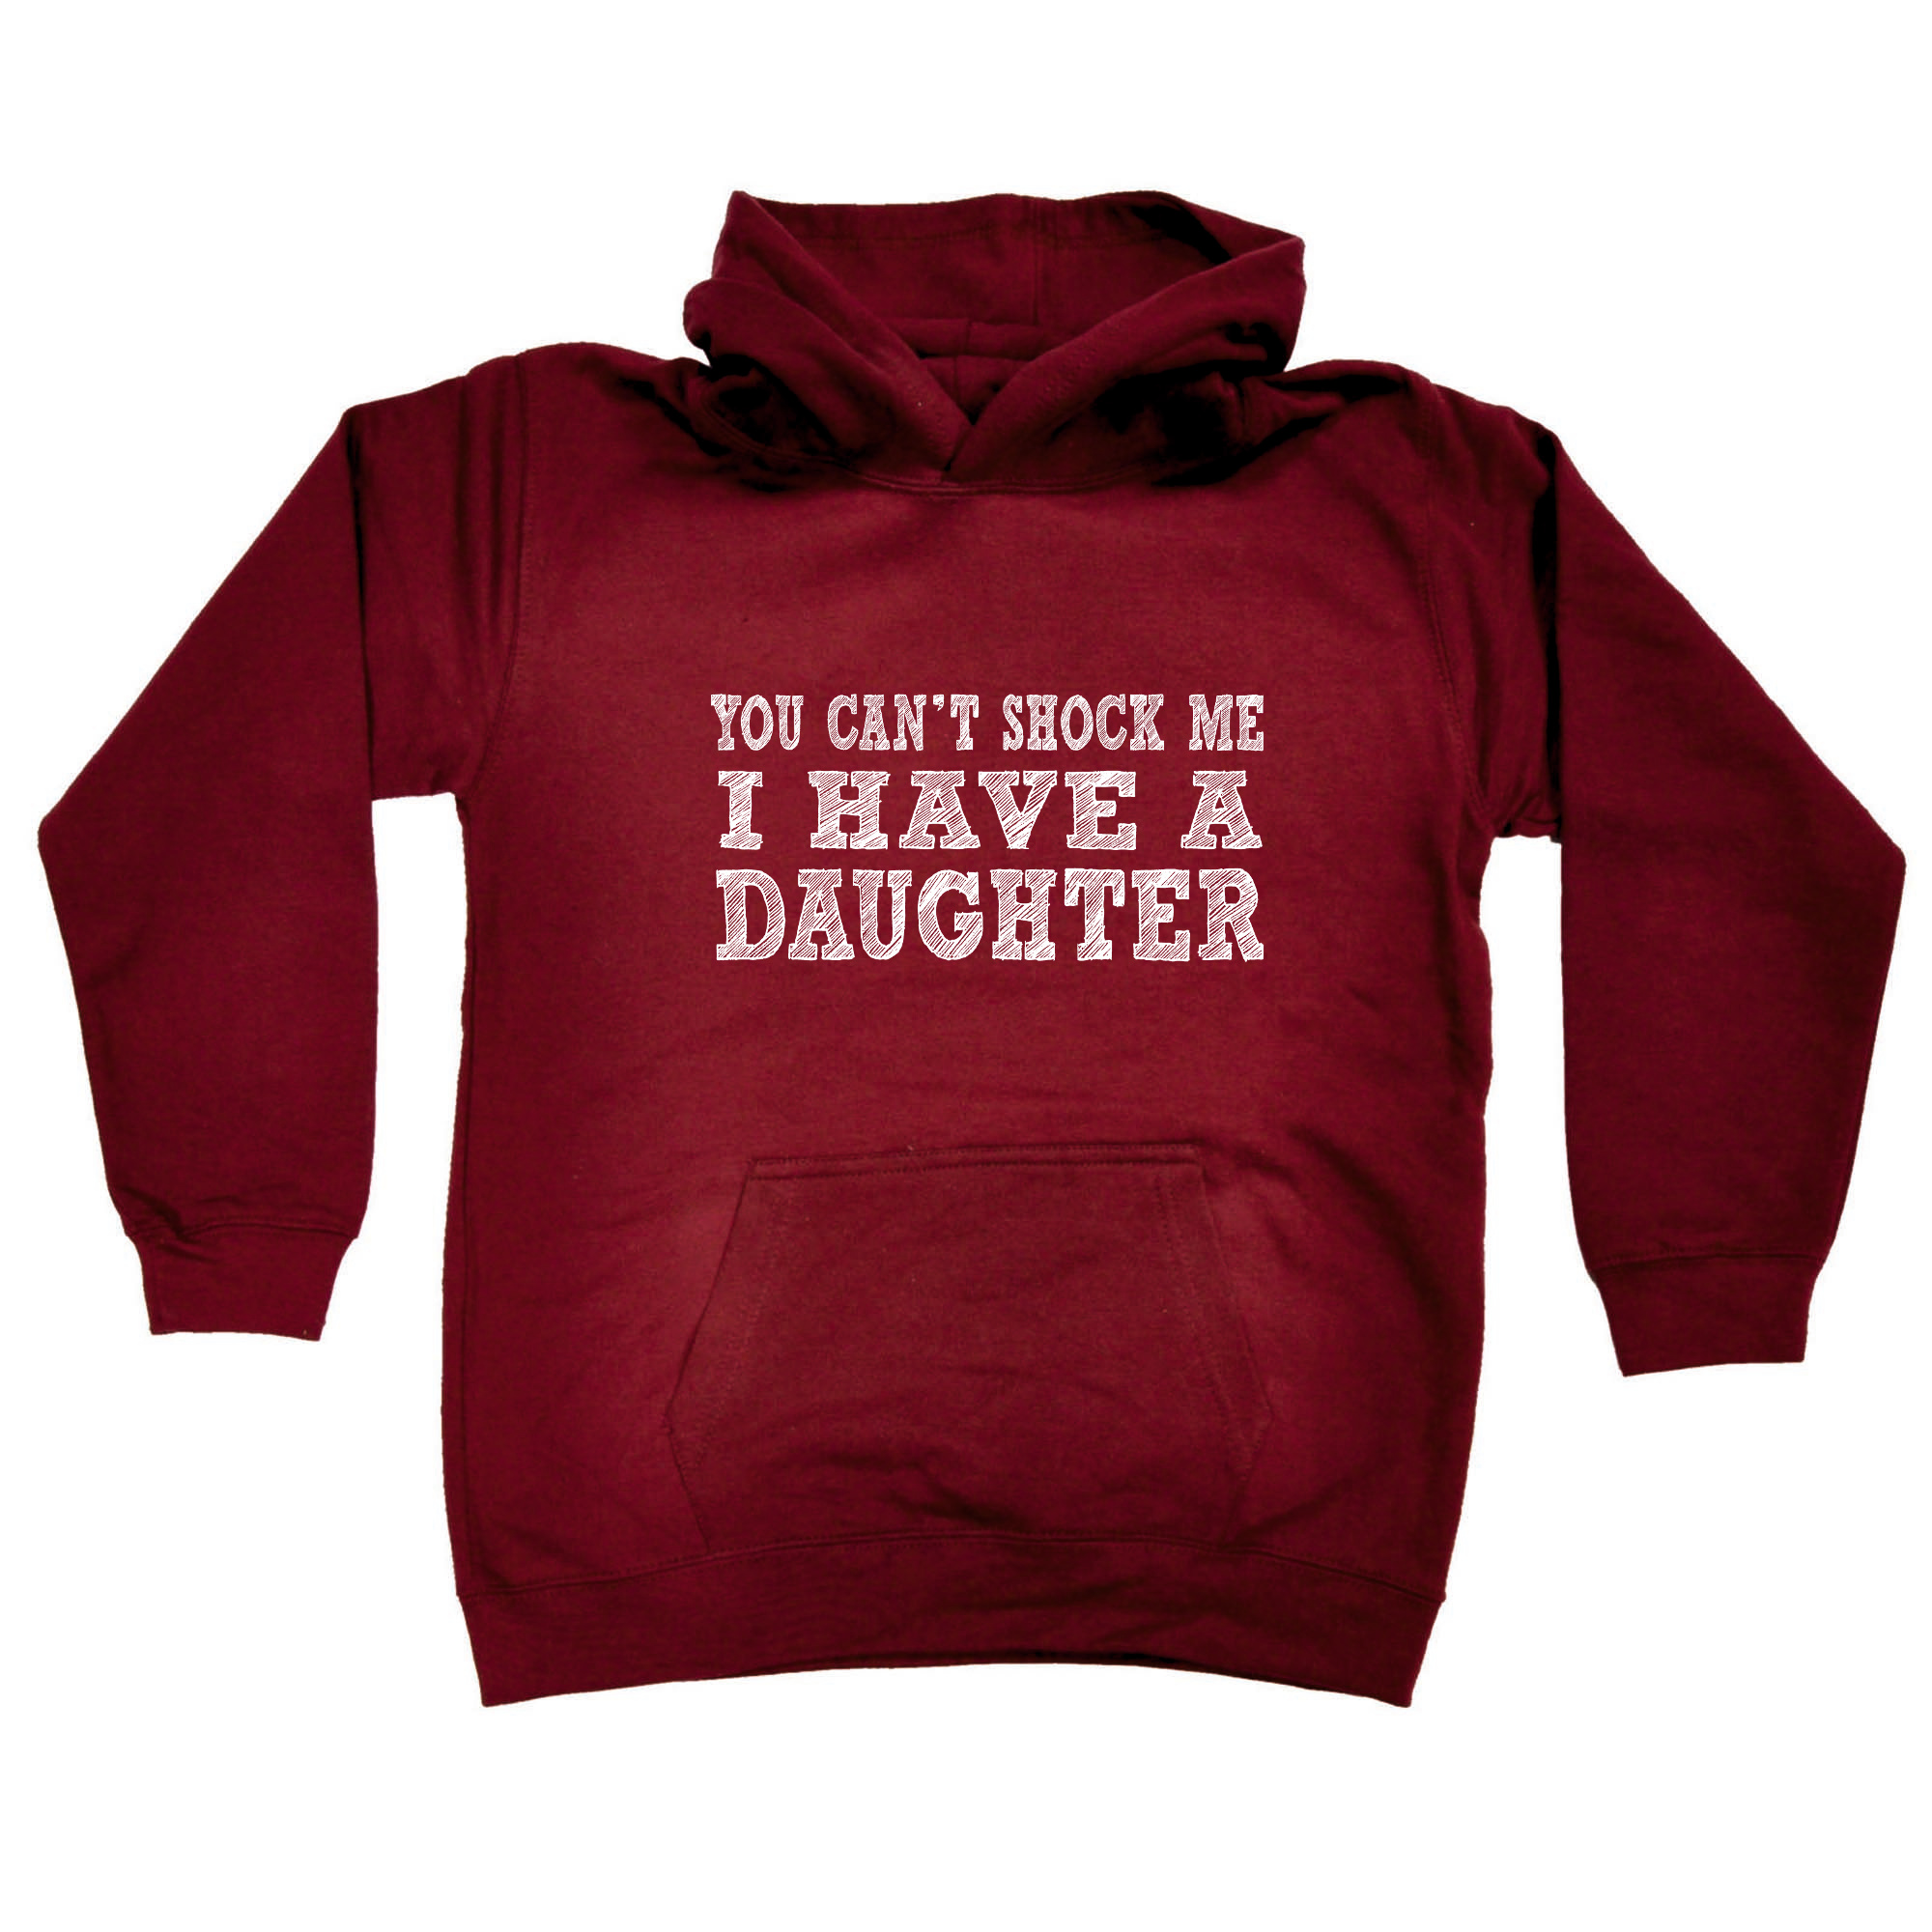 You Cant Shock Me I Have A Daughter - Funny Novelty Kids Children Hoodie - Picture 1 of 1